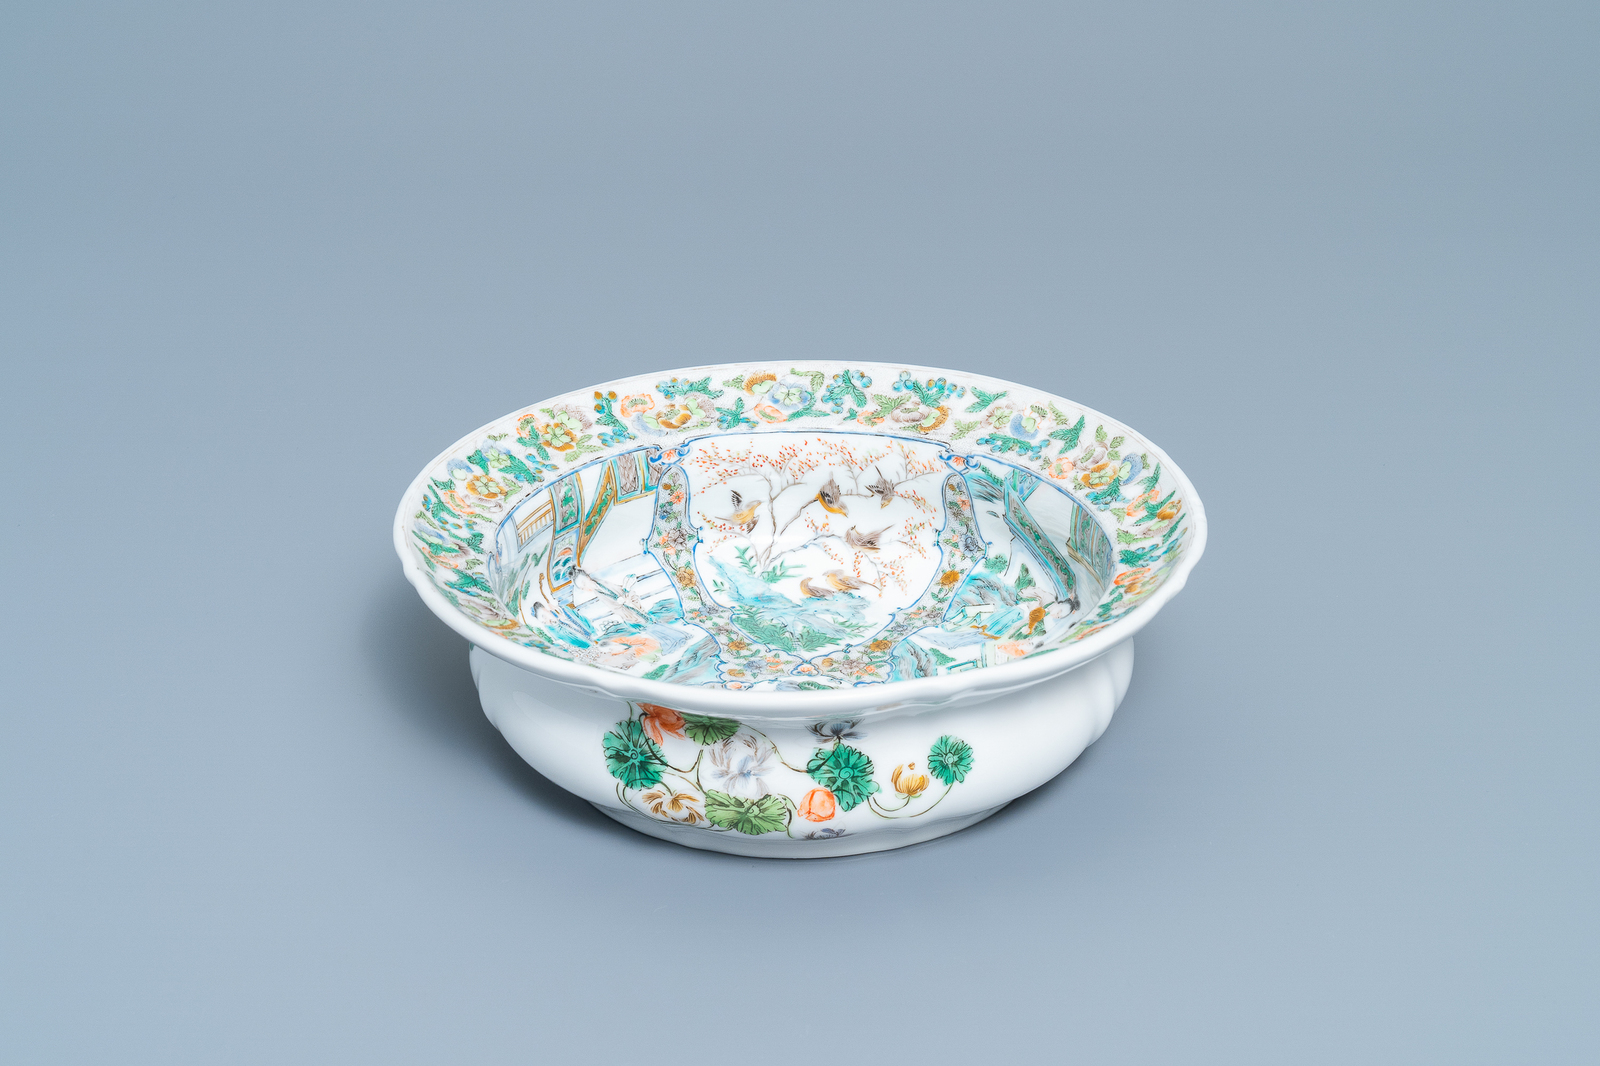 A rare KPM porcelain basin with Cantonese famille verte painting, China and Germany, 19th C. - Image 2 of 7